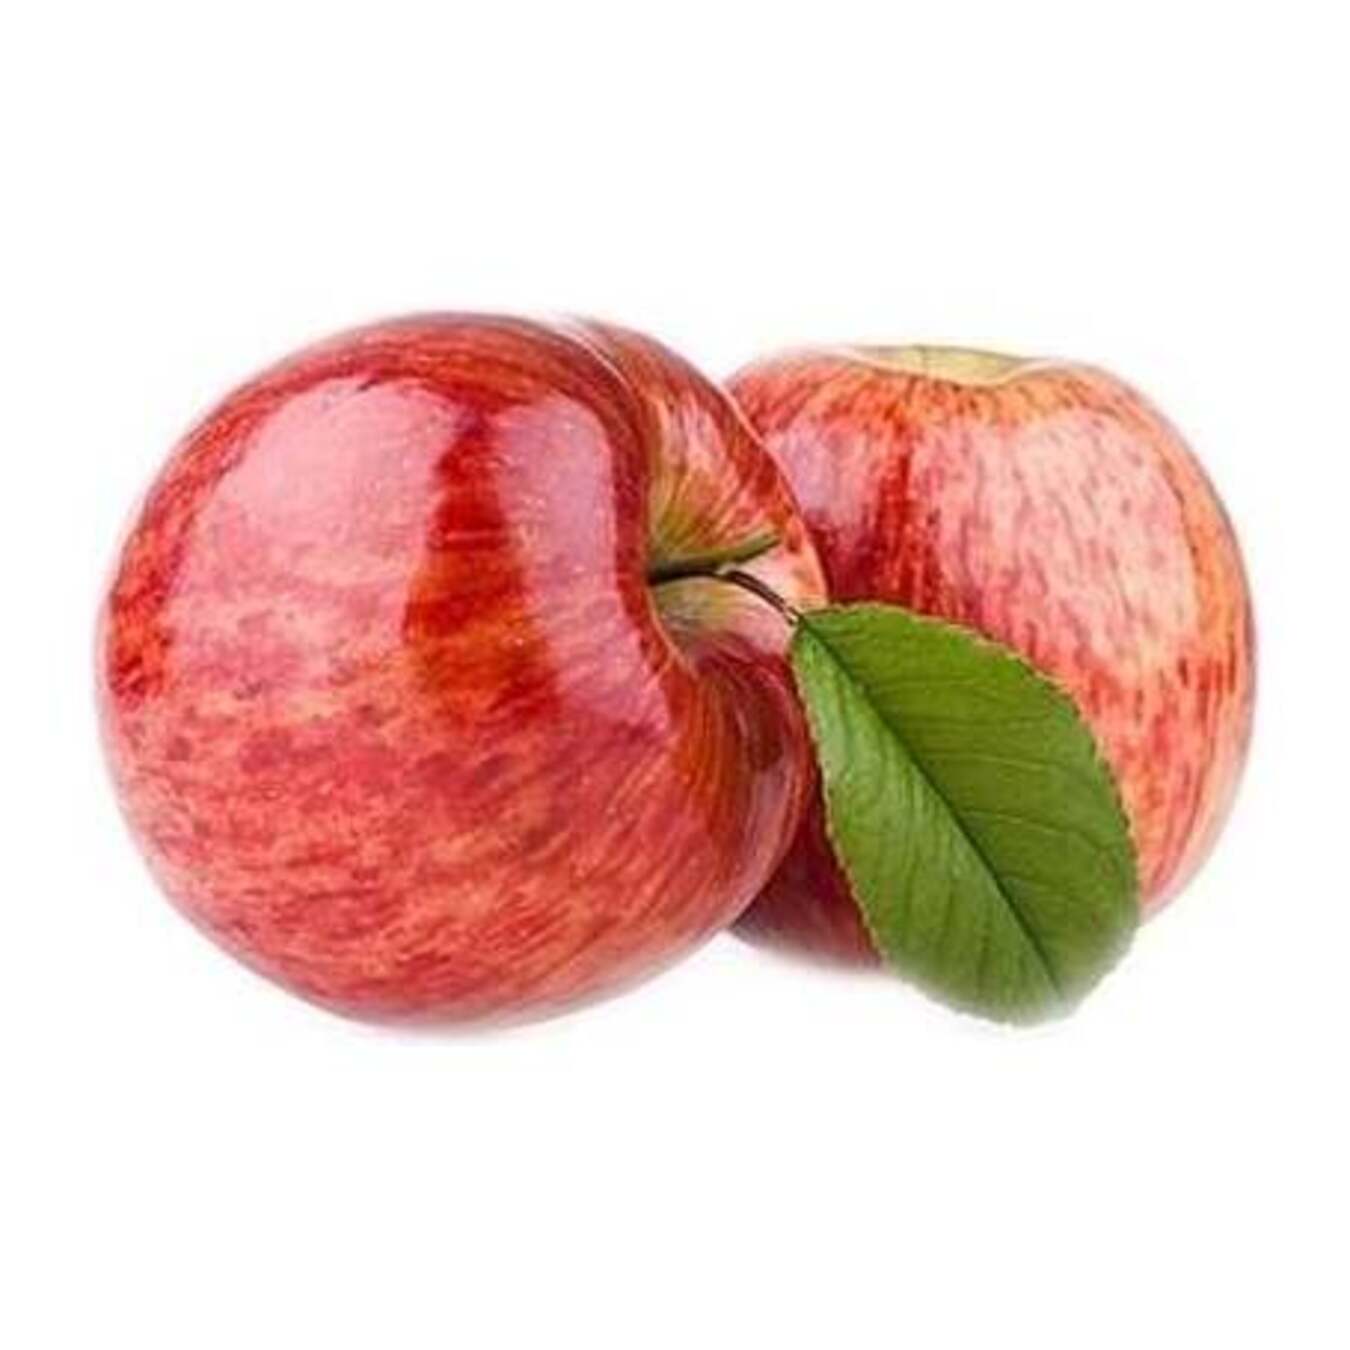 Apple Champion package 1.5 kg 65+